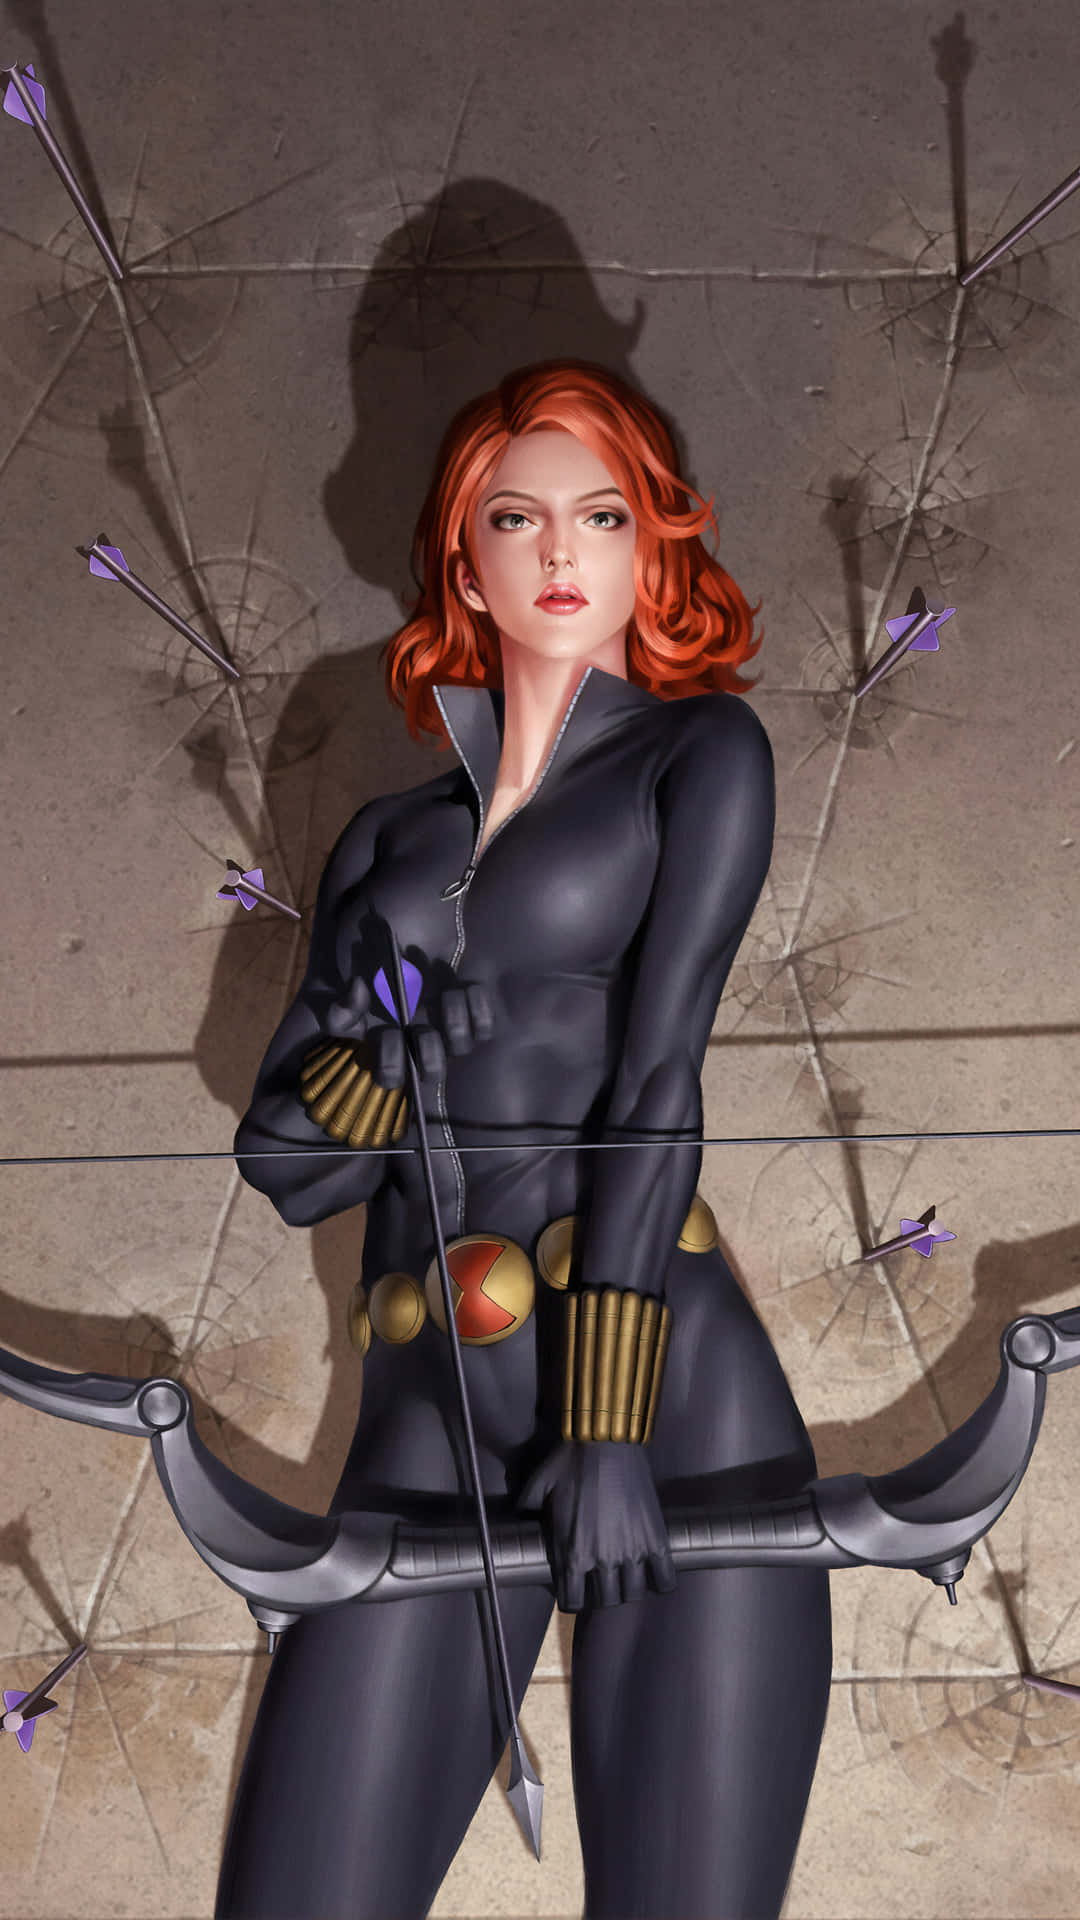 Stay ahead of the game with the sleek and stylish Black Widow iPhone. Wallpaper